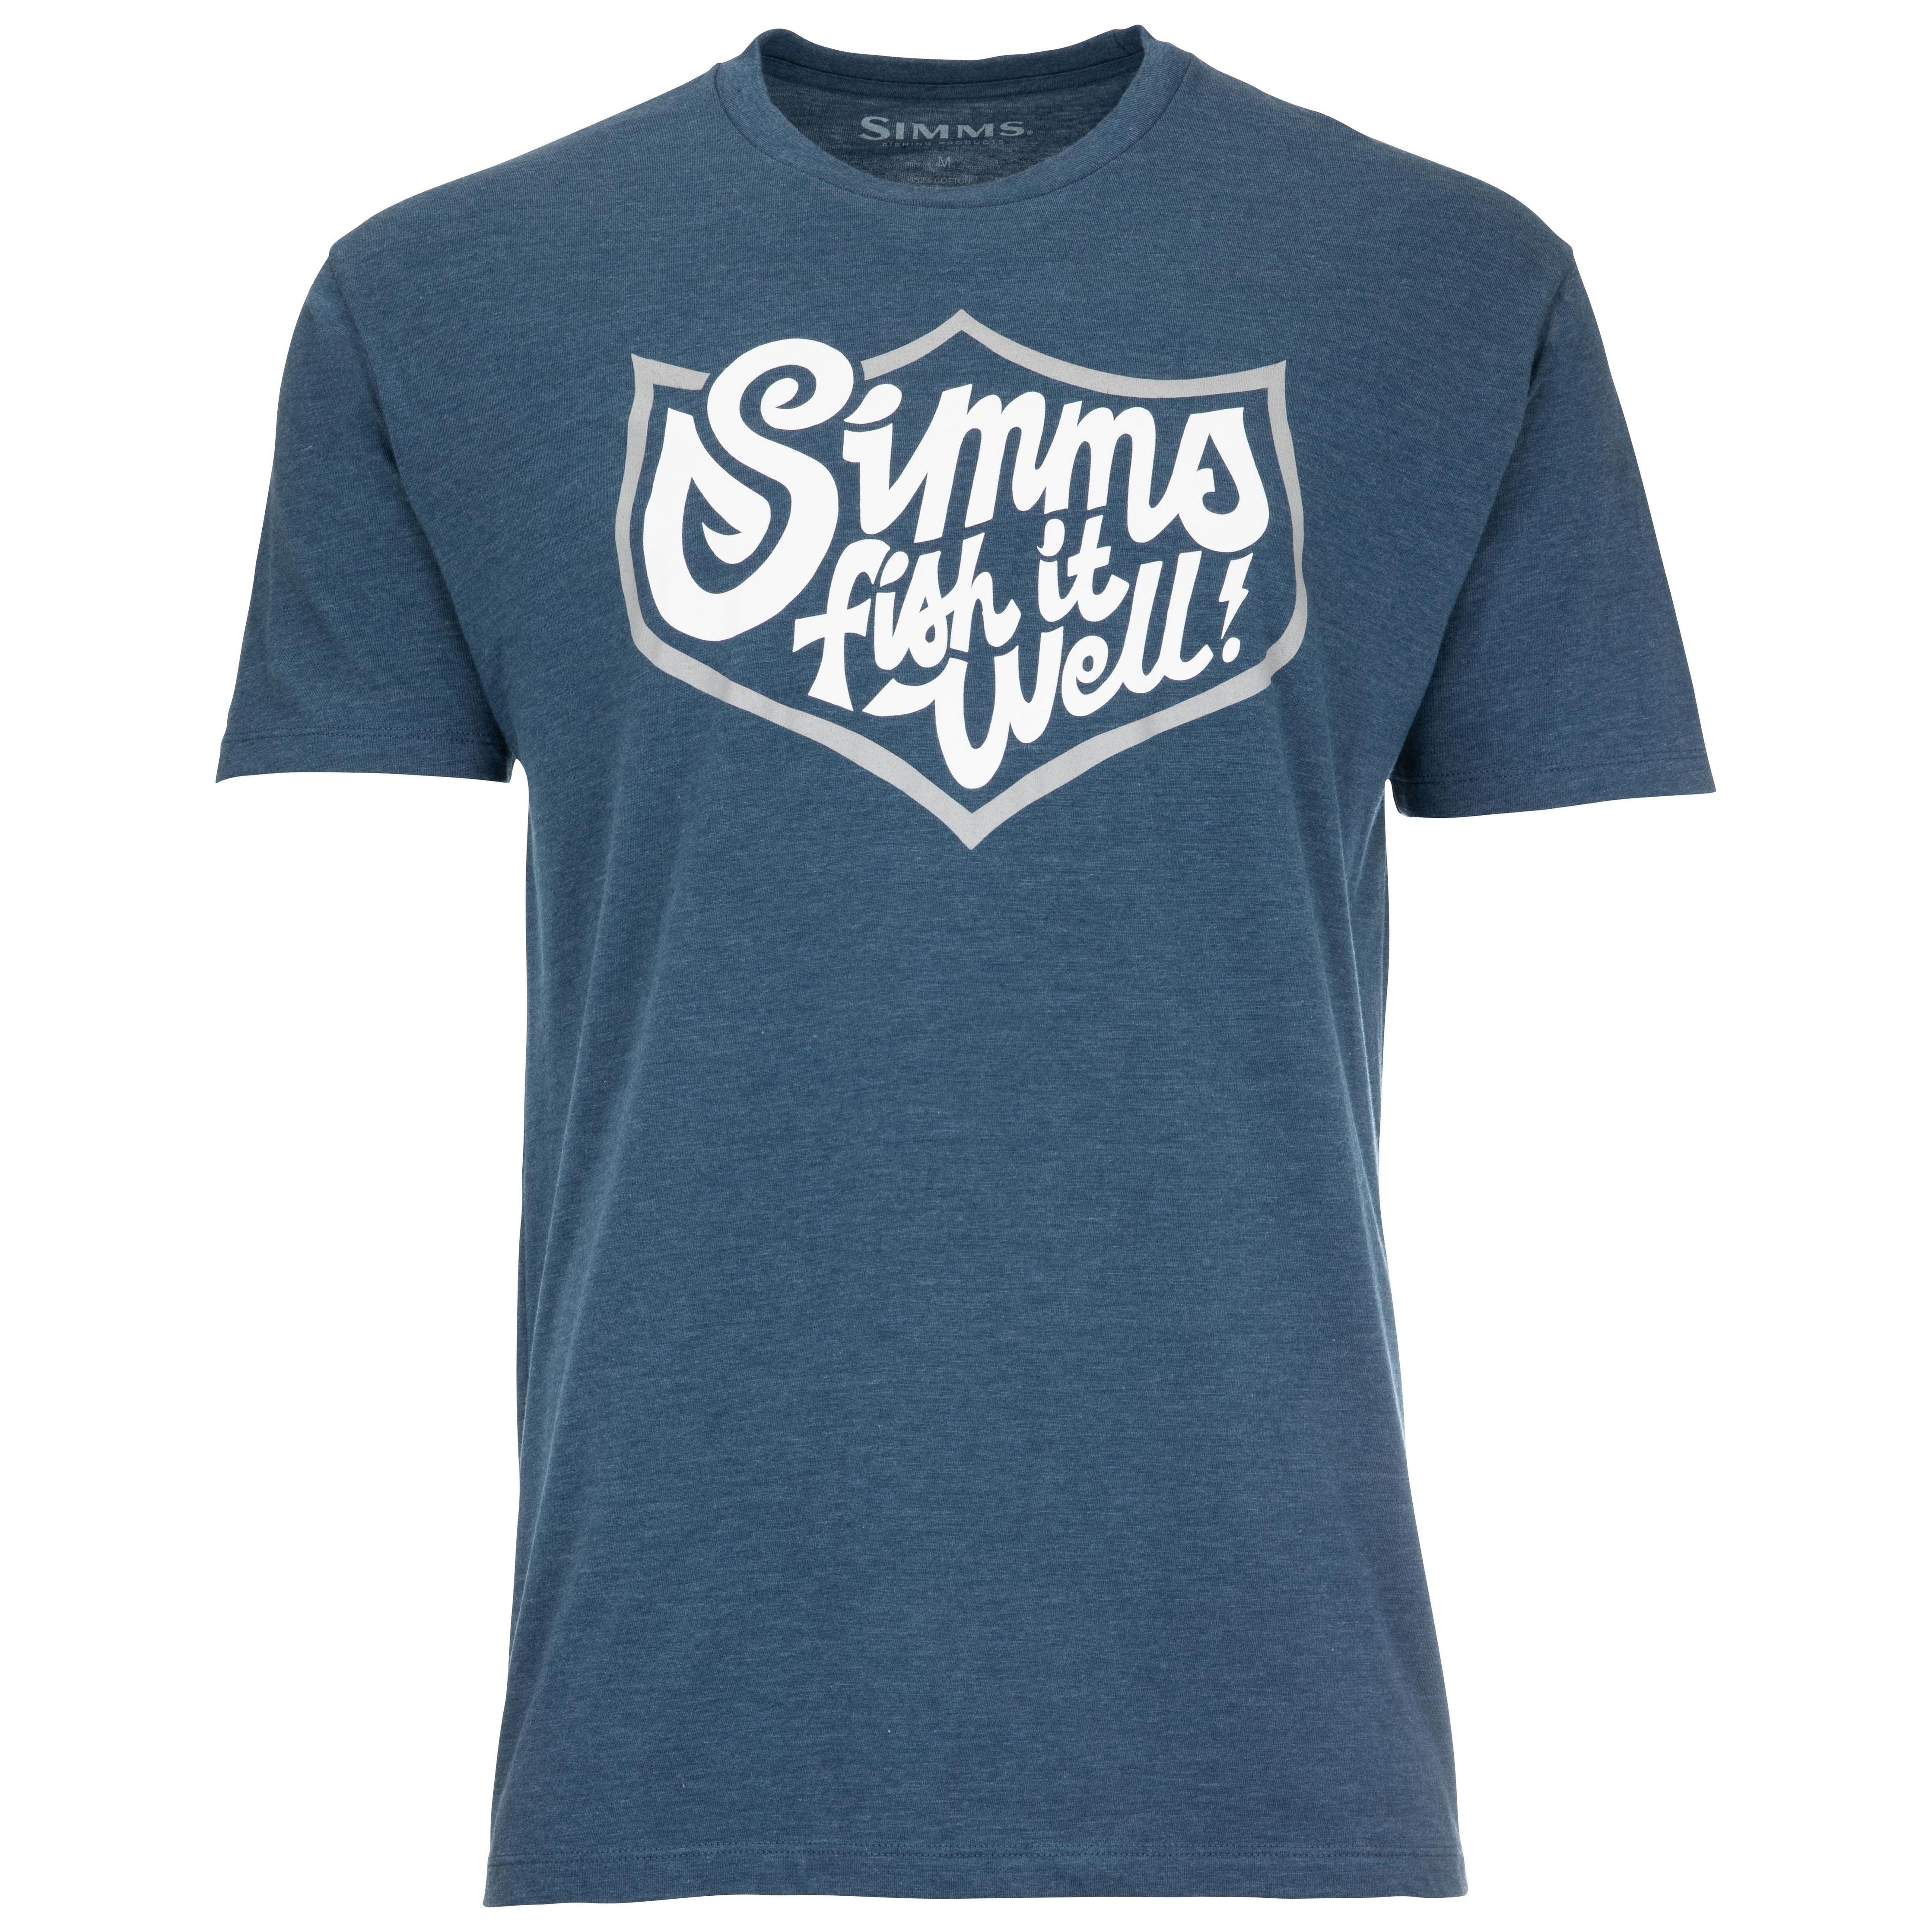 Simms Fish It Well Badge T-Shirt Sailor Blue Heather Image 01